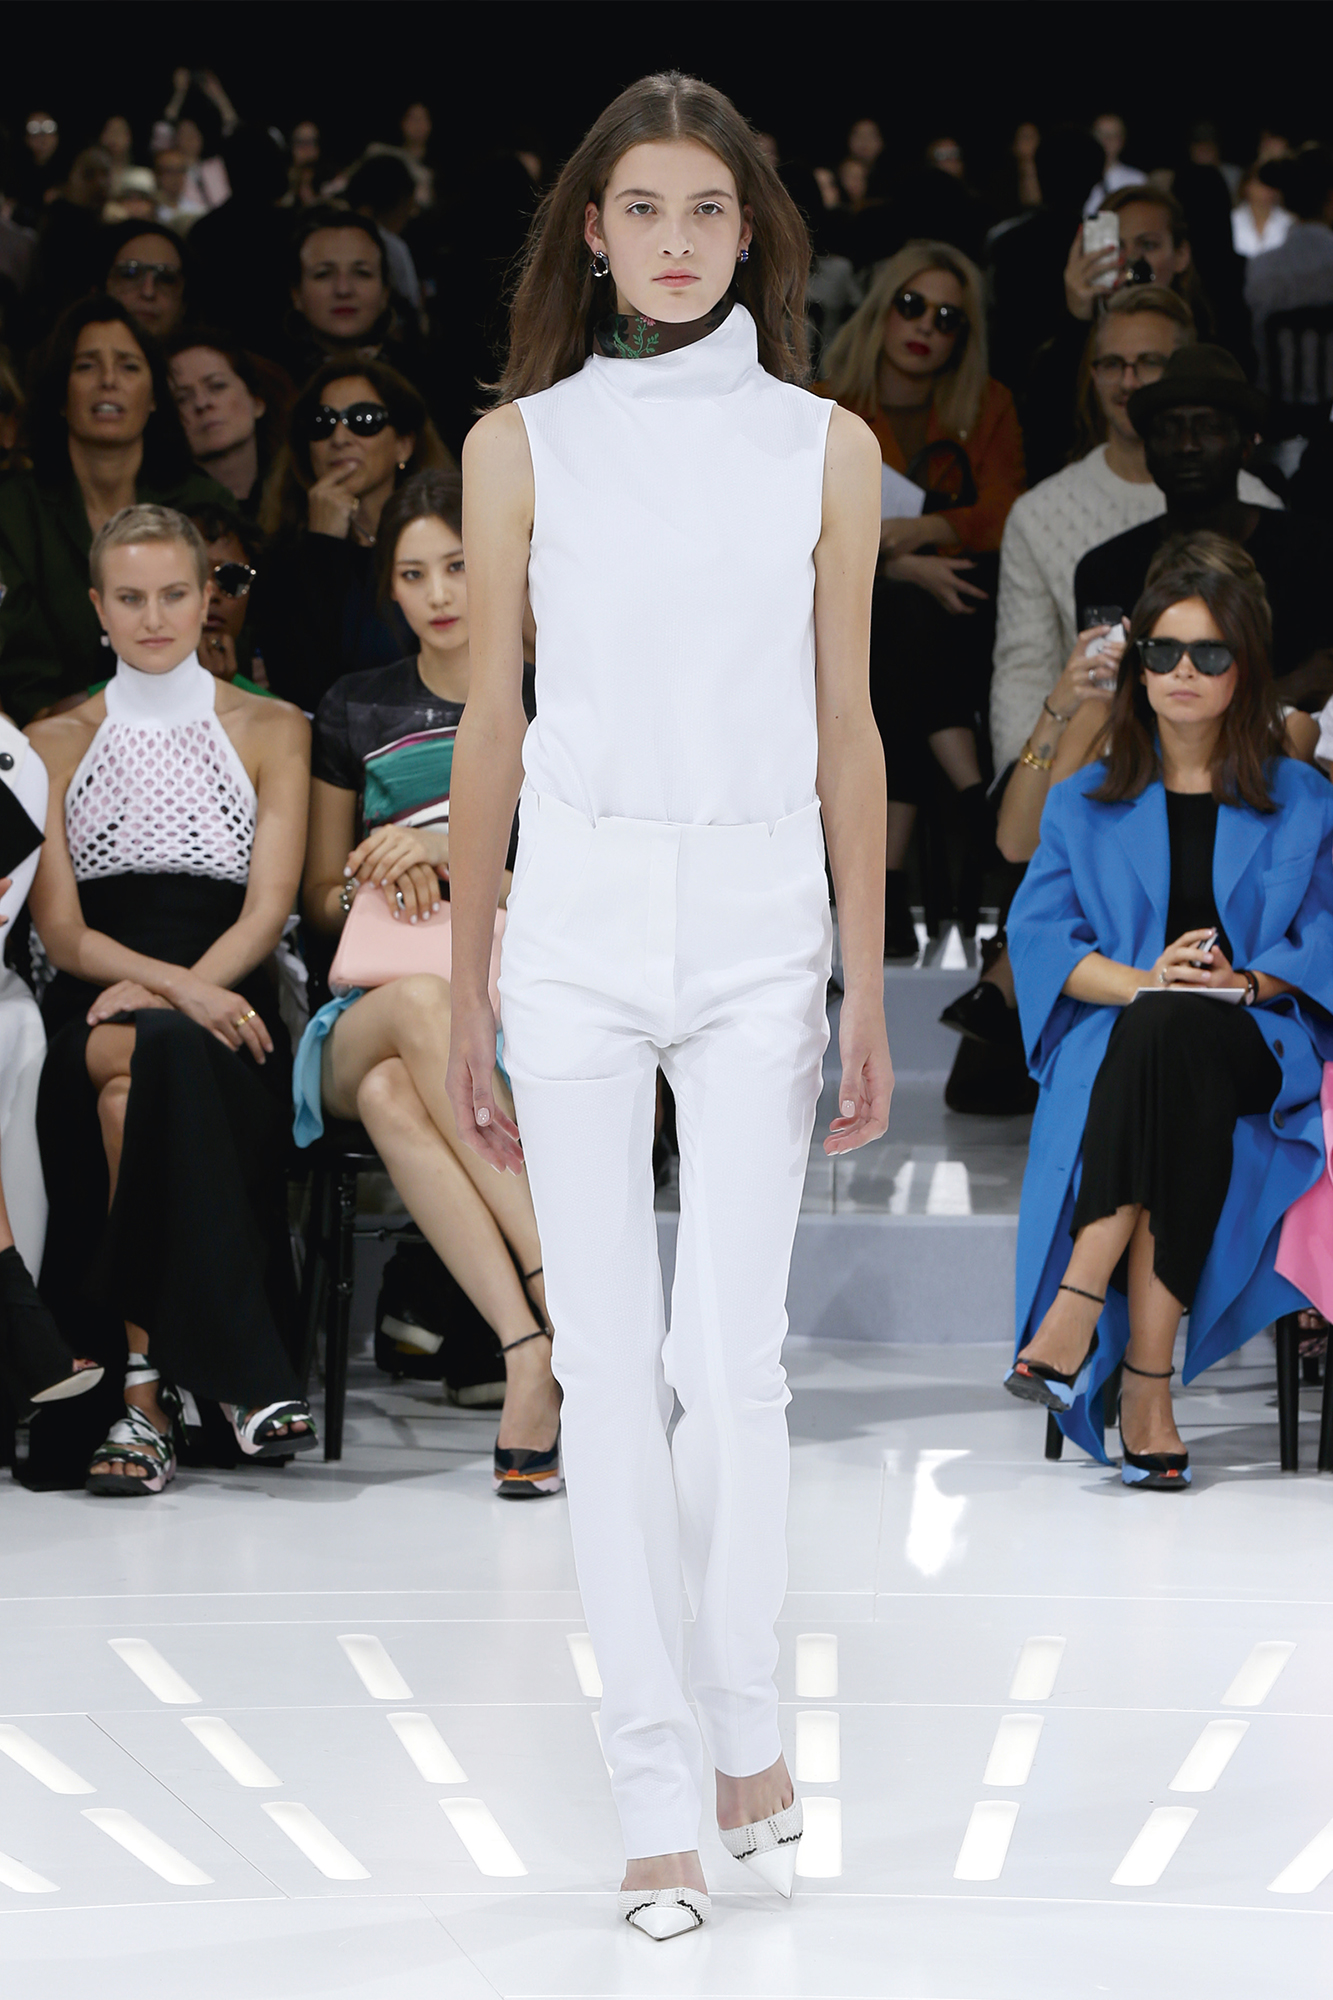 Christian Dior Haute Couture Spring-Summer Ready To Wear Dresses & Accessories Collection 2015-16 (3)